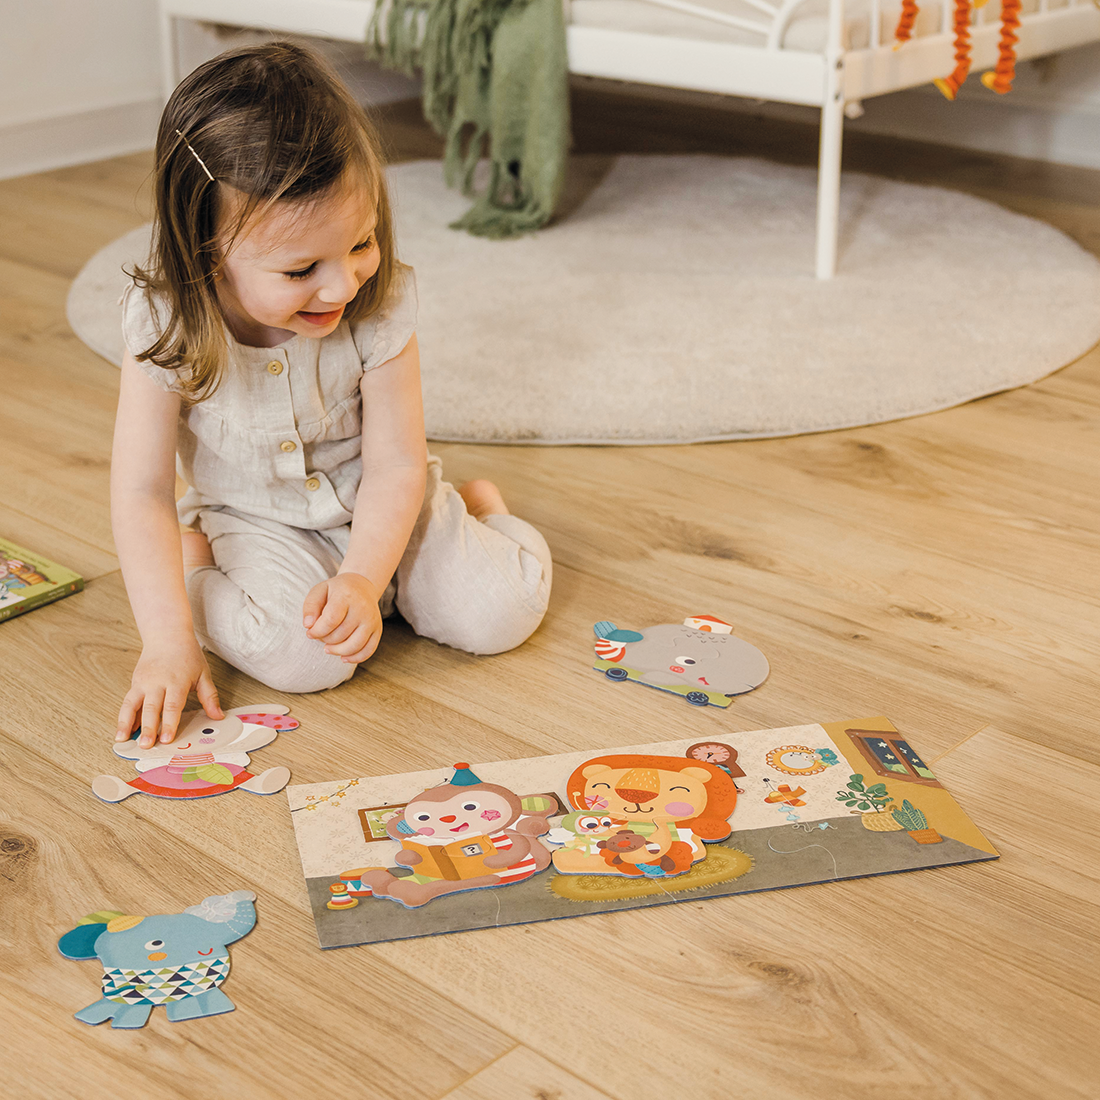 Play With Friends Puzzle Pairs lifestyle image with child